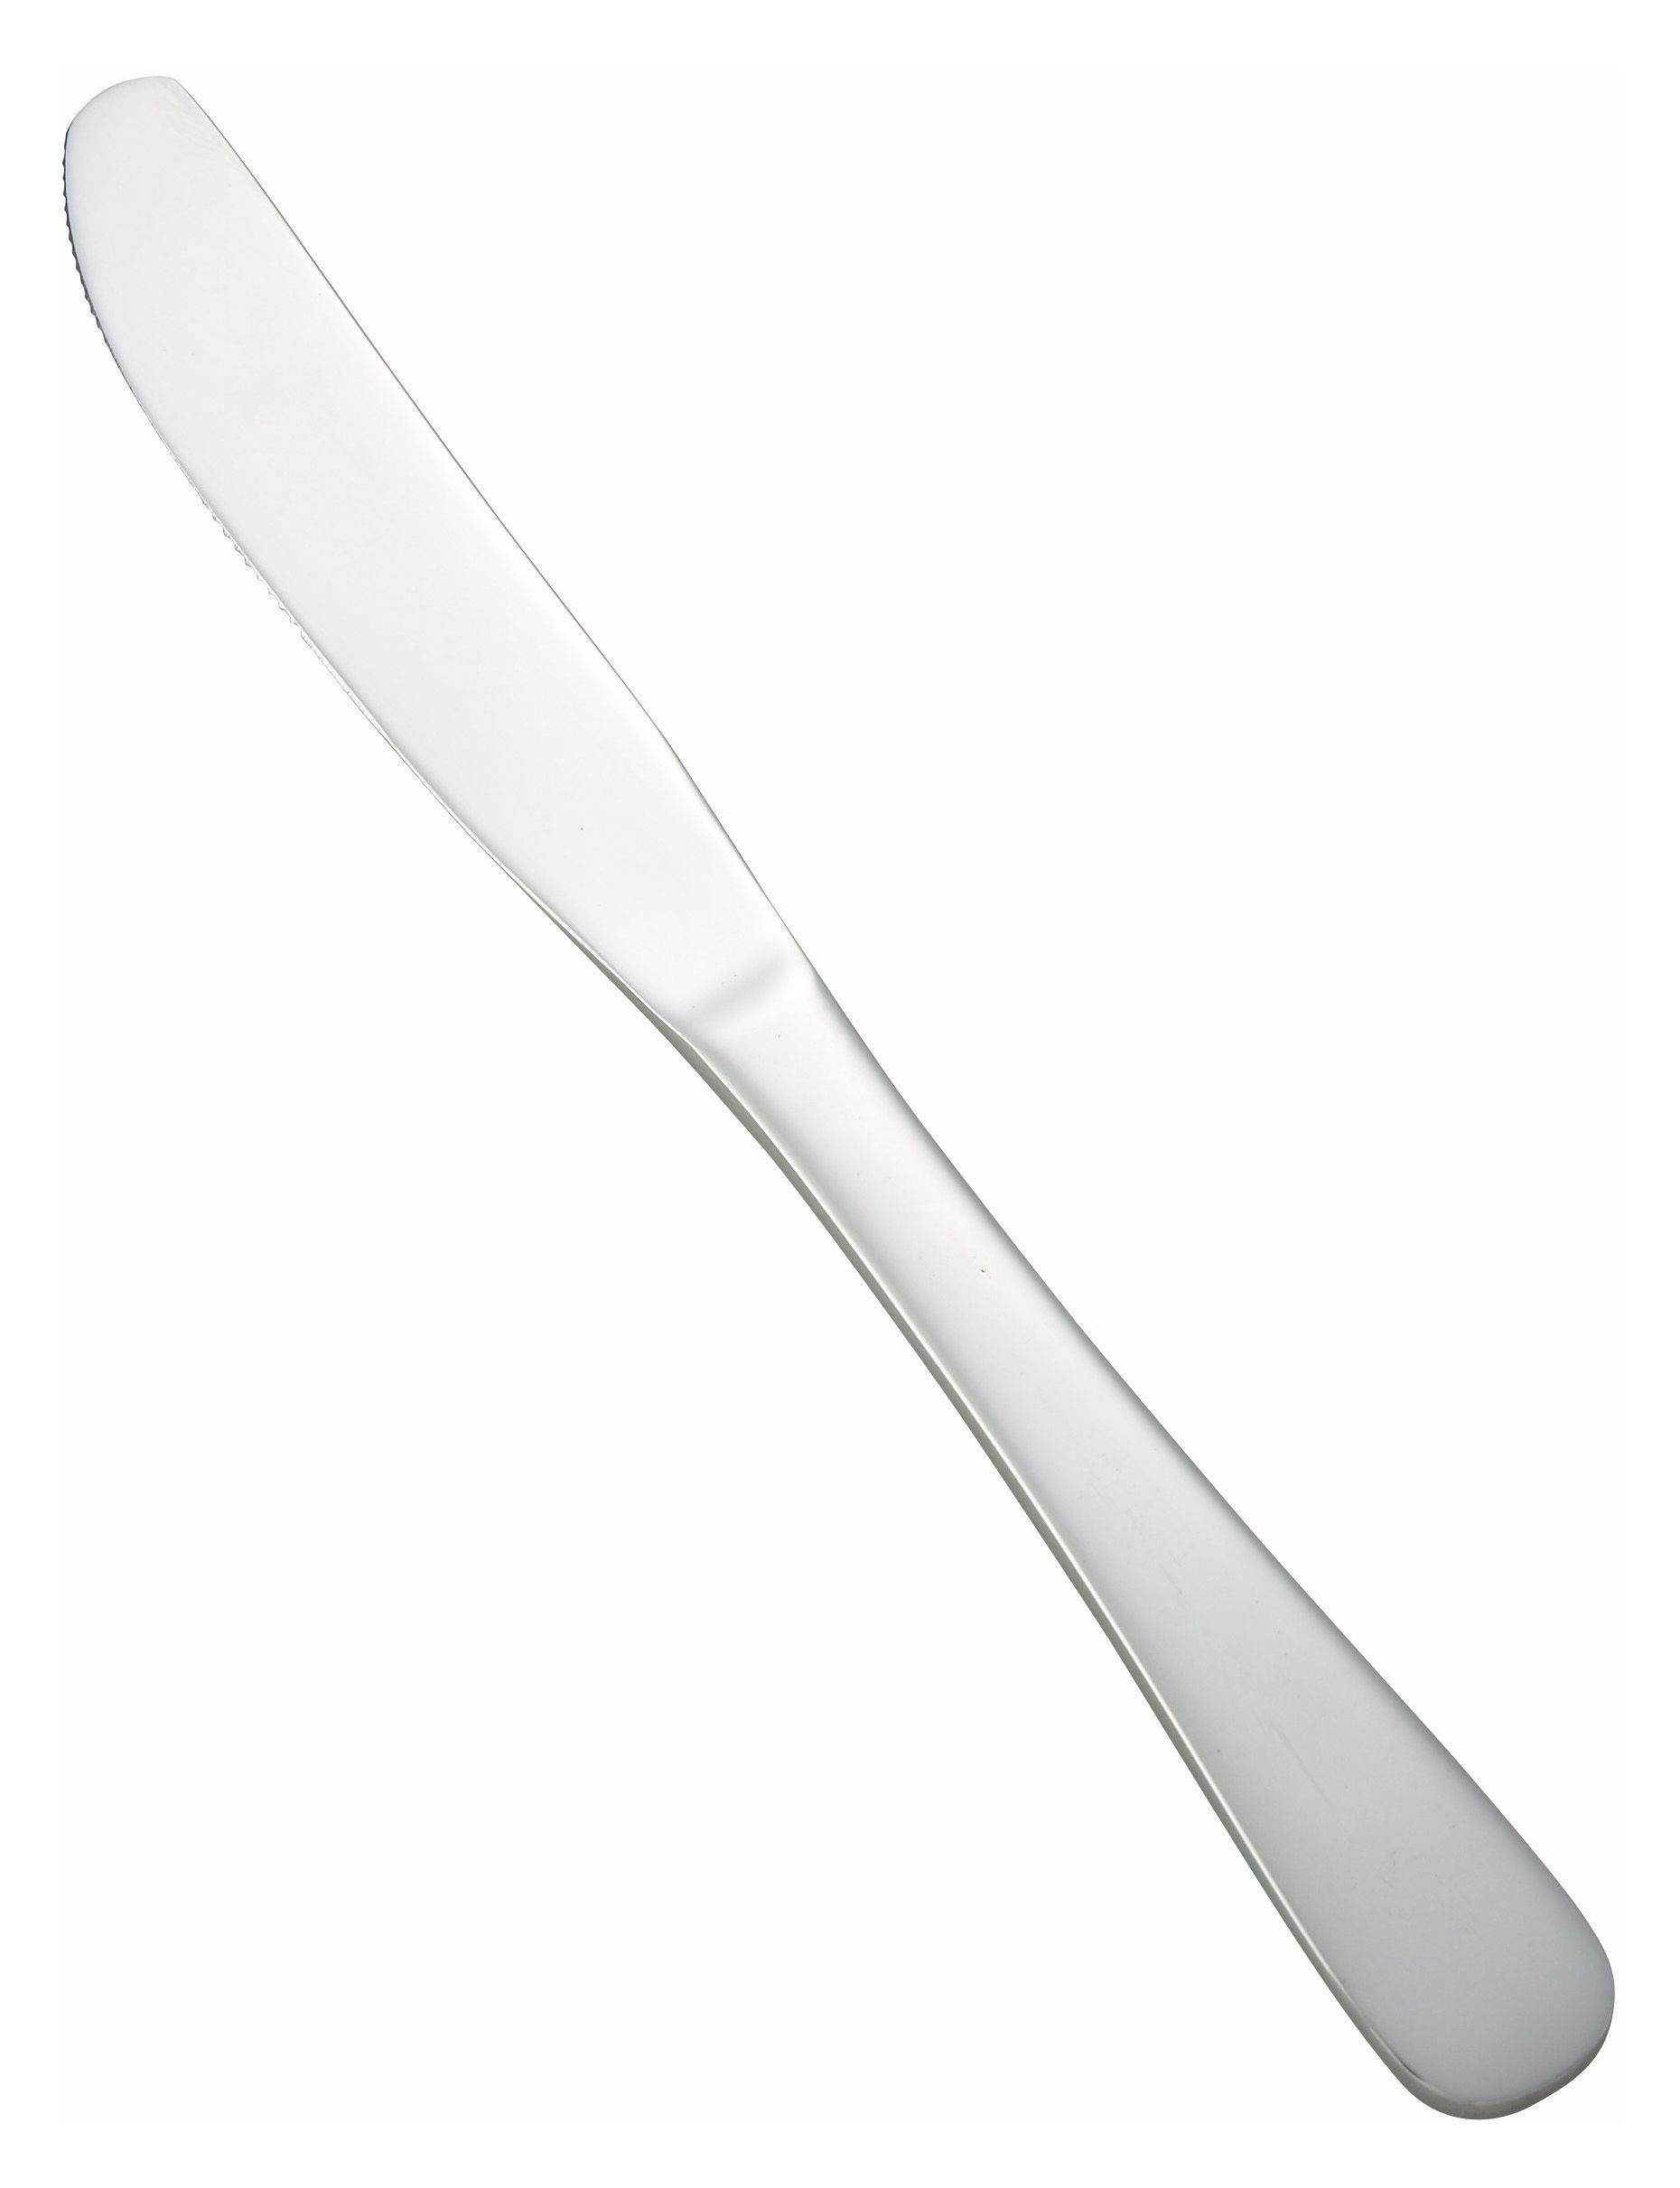 Winco 0026-08 Elite Heavy Weight Mirror Finish Stainless Steel Dinner Knife (12/Pack)